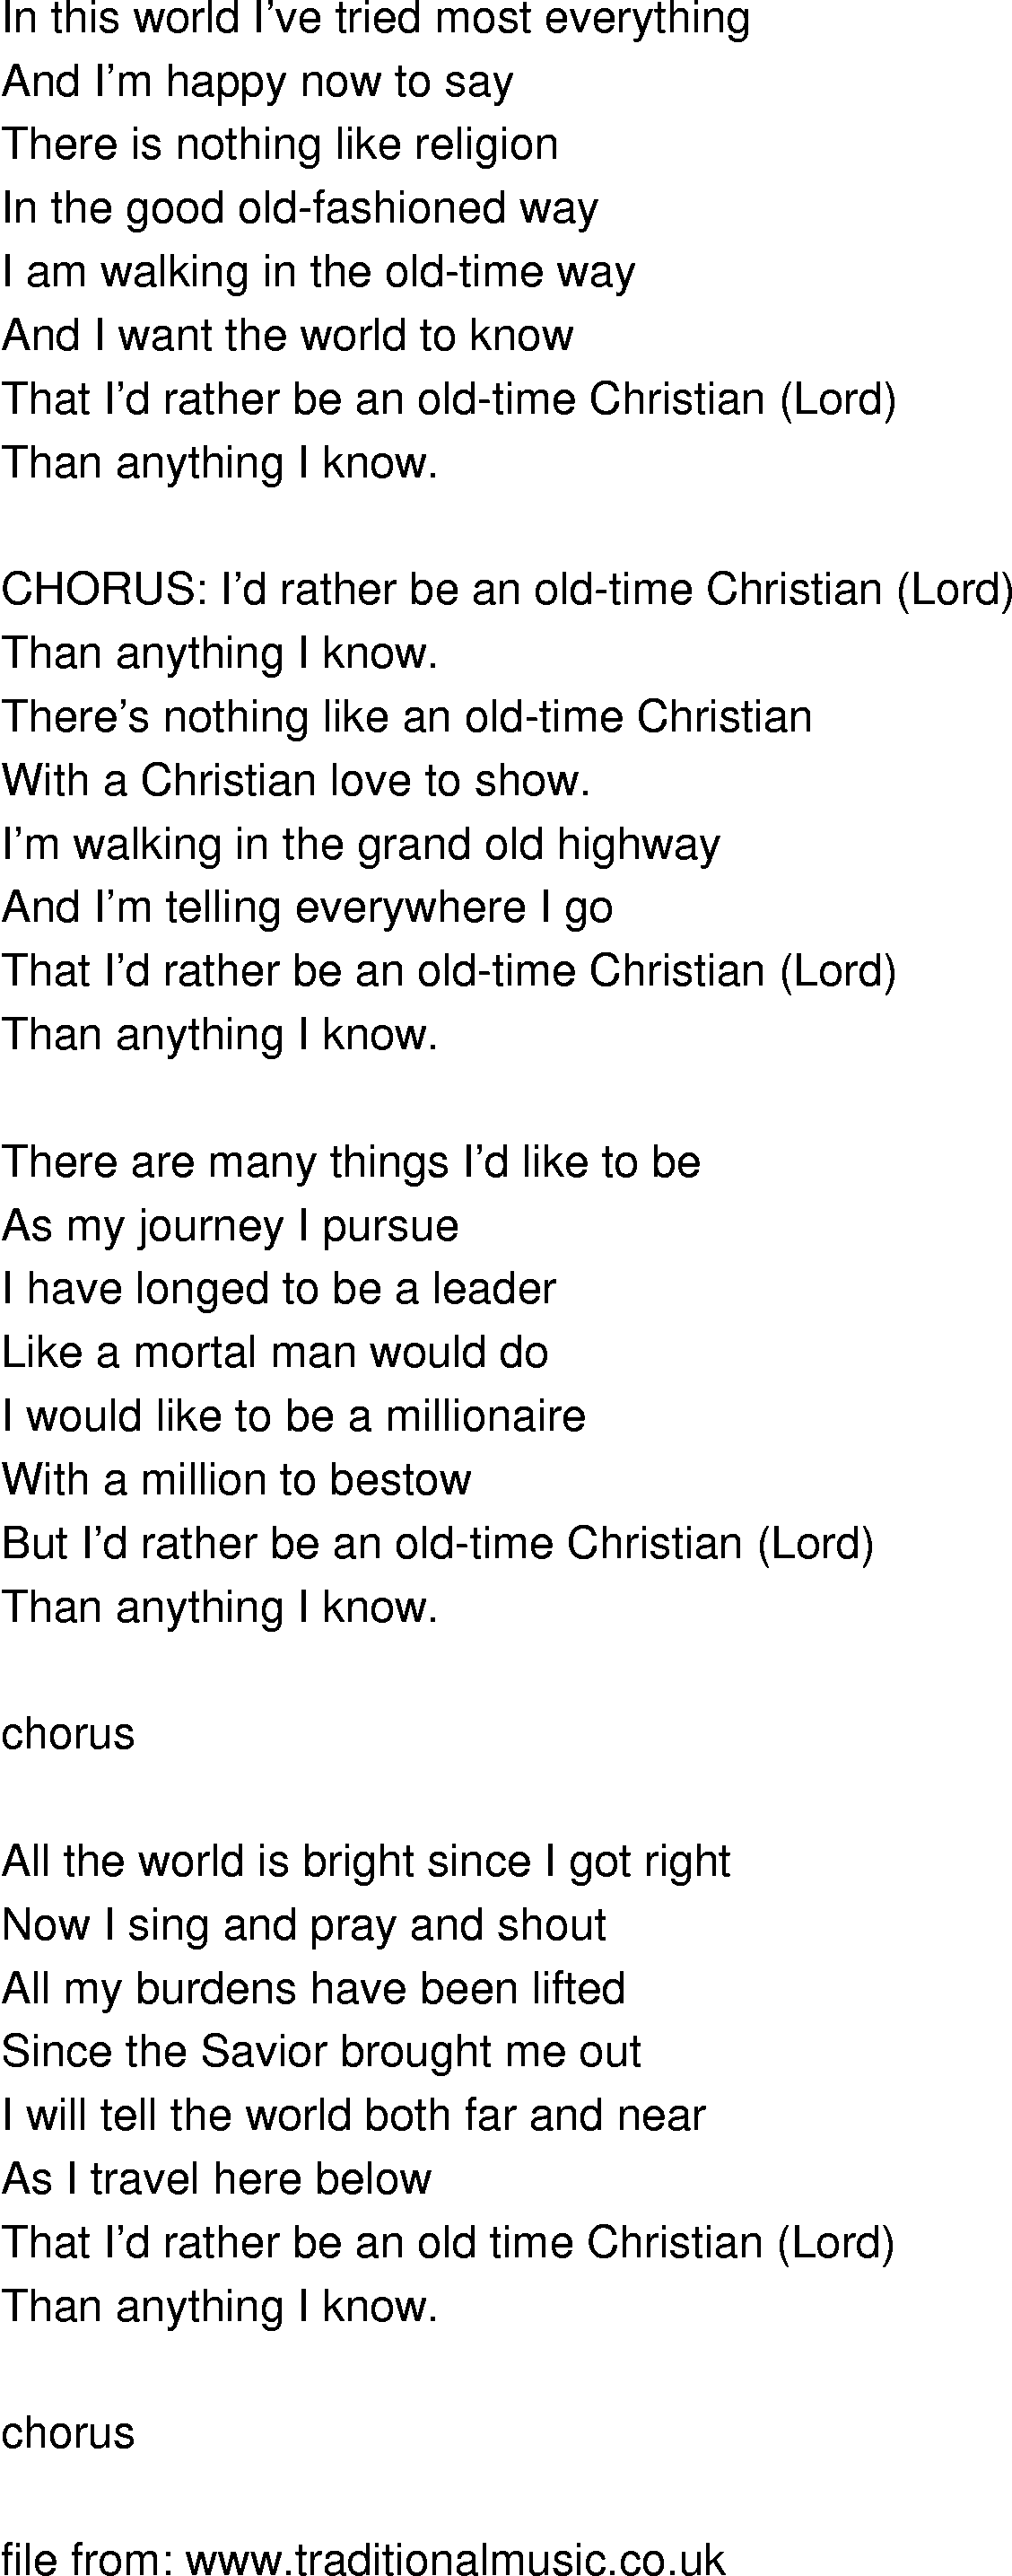 Old-Time (oldtimey) Song Lyrics - id rather be an old time christian